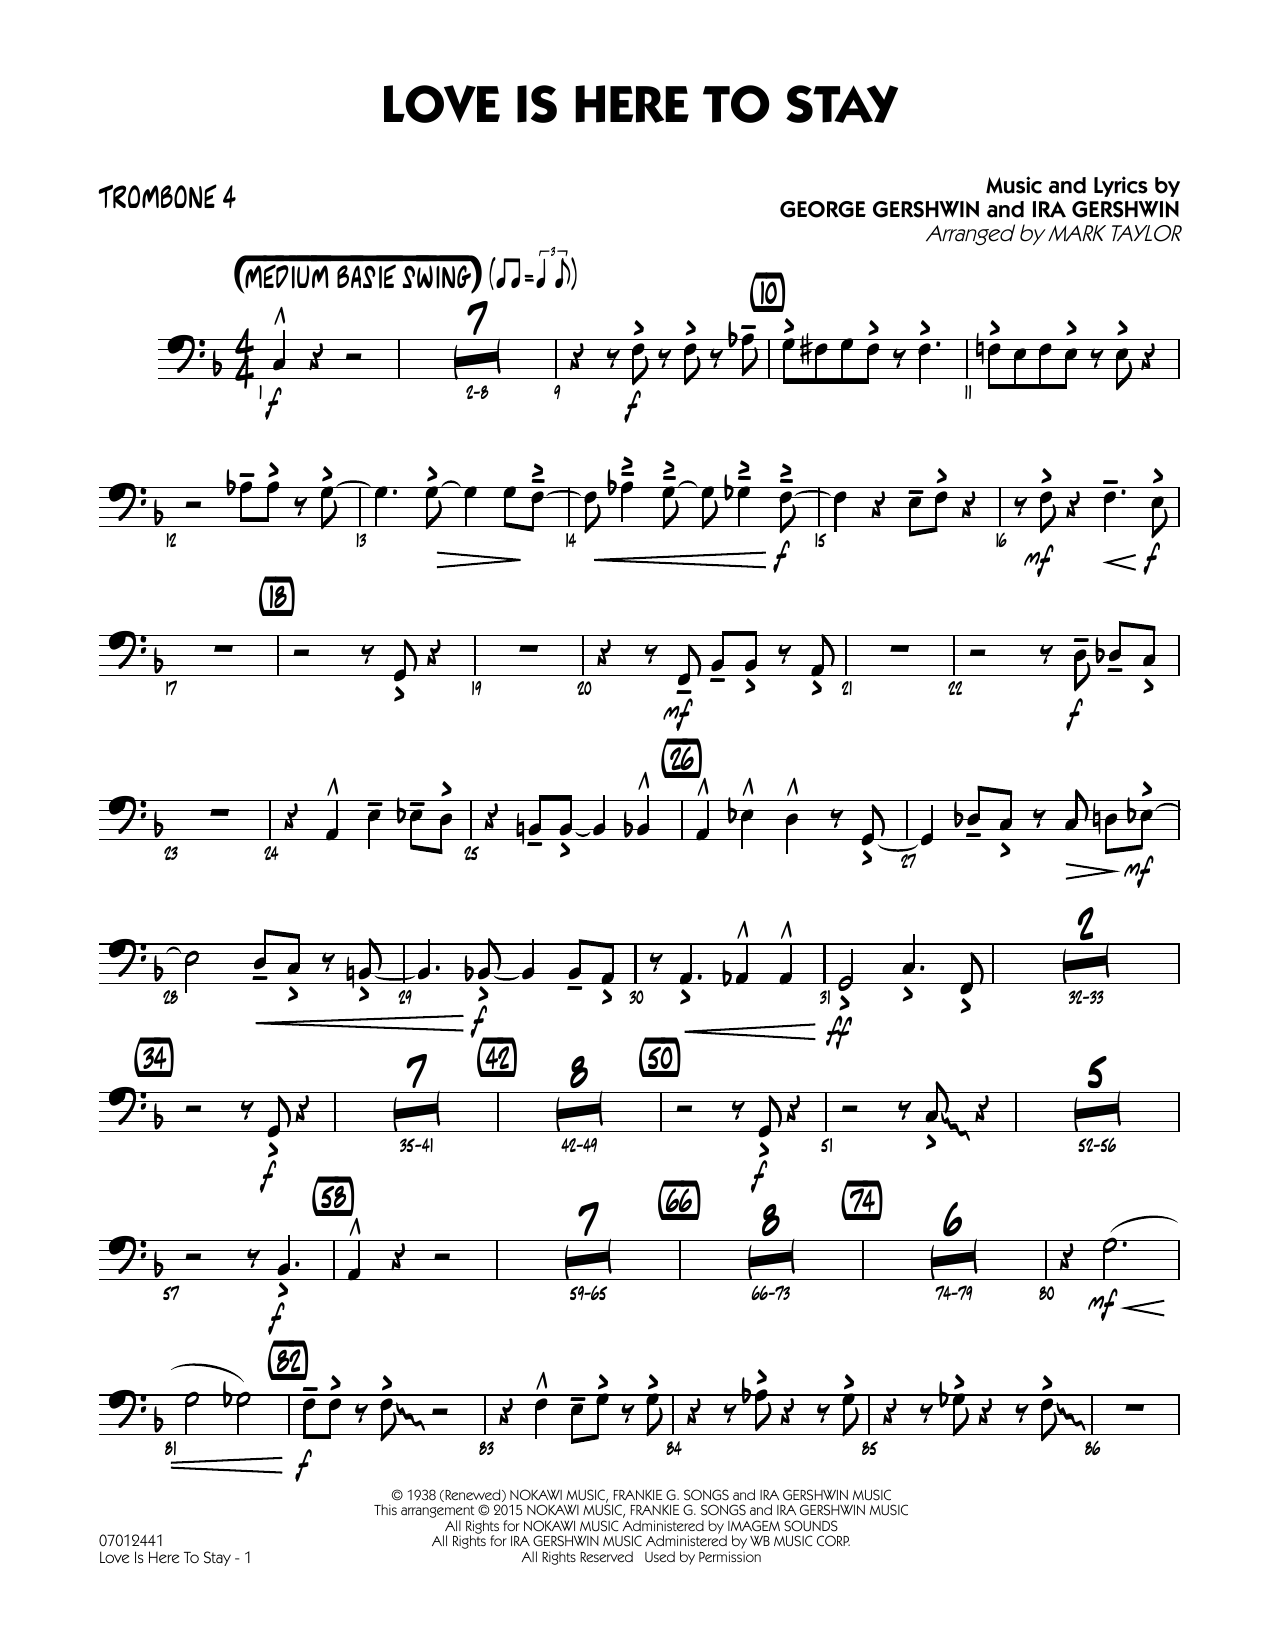 Mark Taylor Love Is Here to Stay - Trombone 4 sheet music notes and chords. Download Printable PDF.